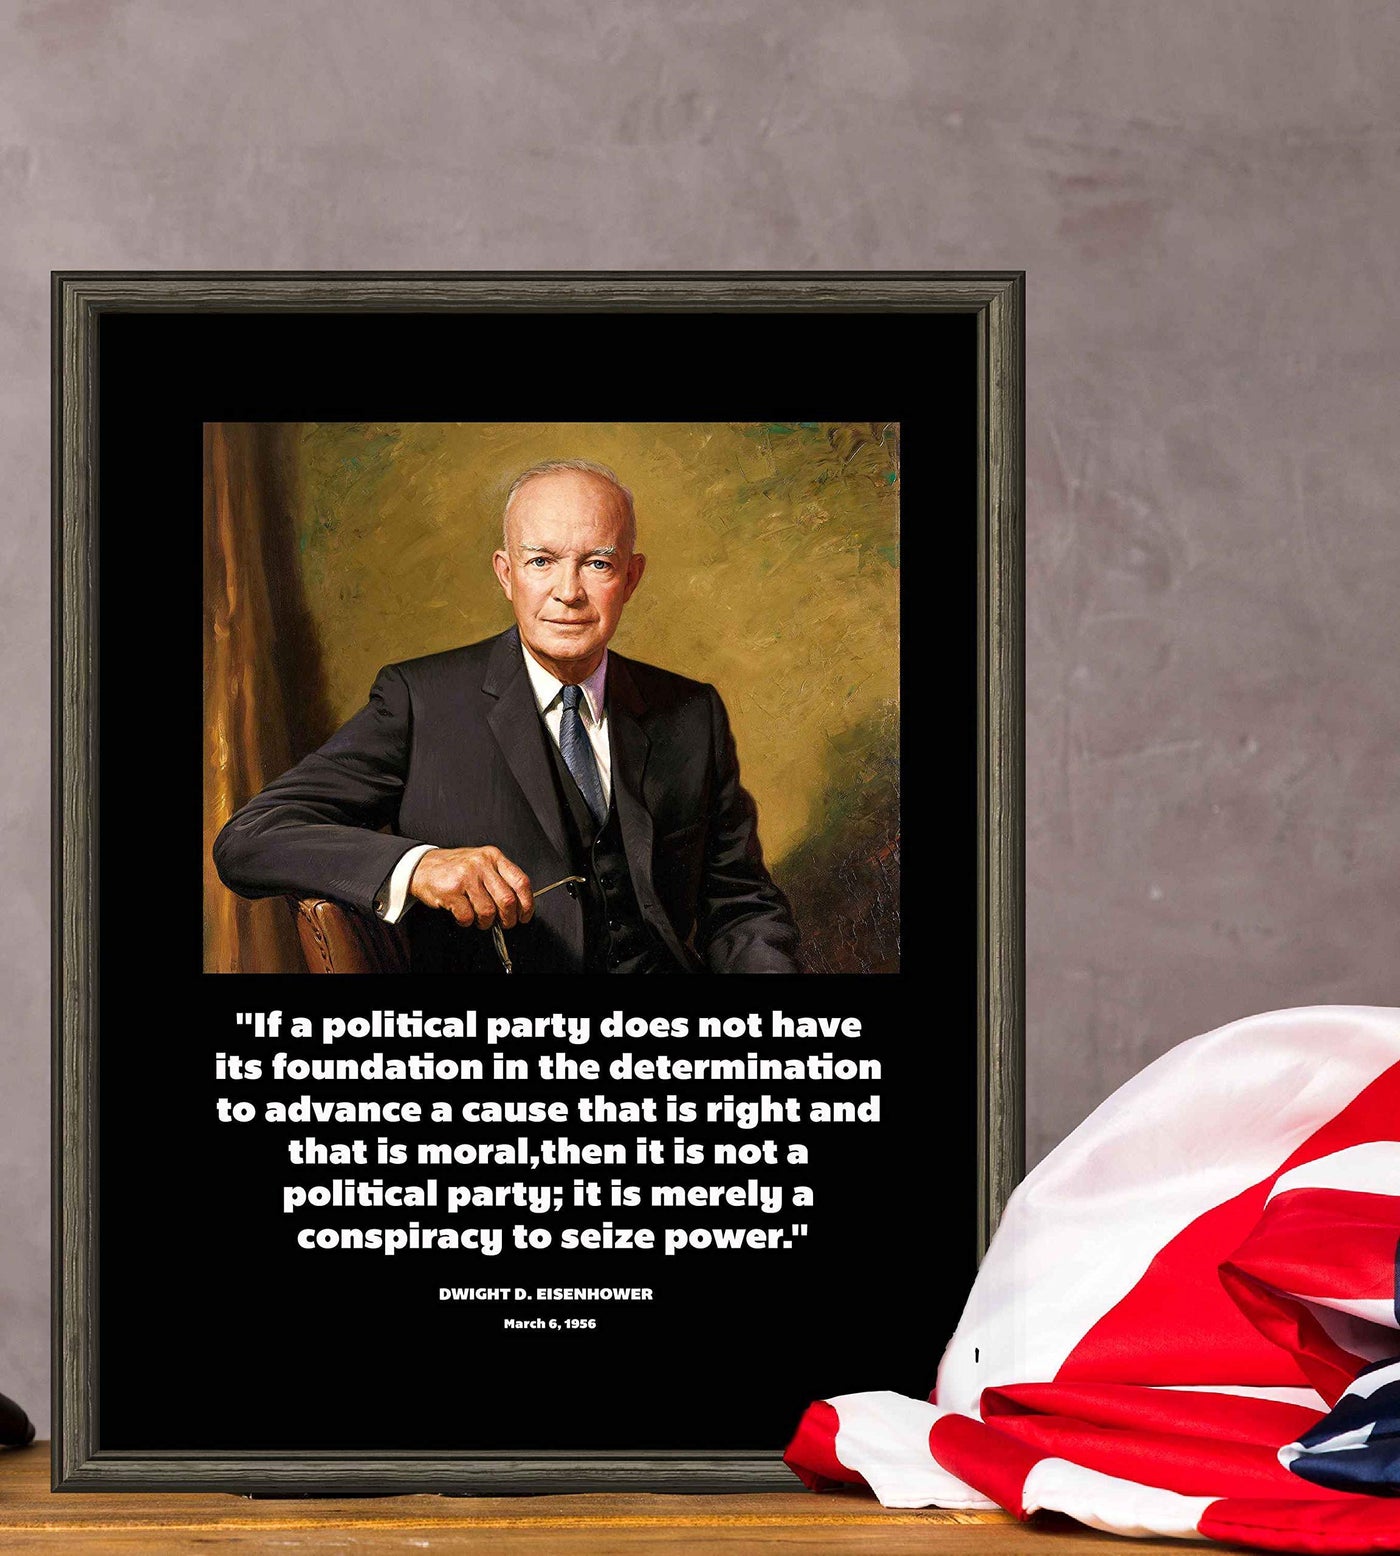 Political Party Conspiracy- Dwight D. Eisenhower Quotes- 8 x 10" Presidential Portrait Wall Art Print-Ready to Frame. Home-Office-School-Library D?cor. Great Gift for Political Minds!